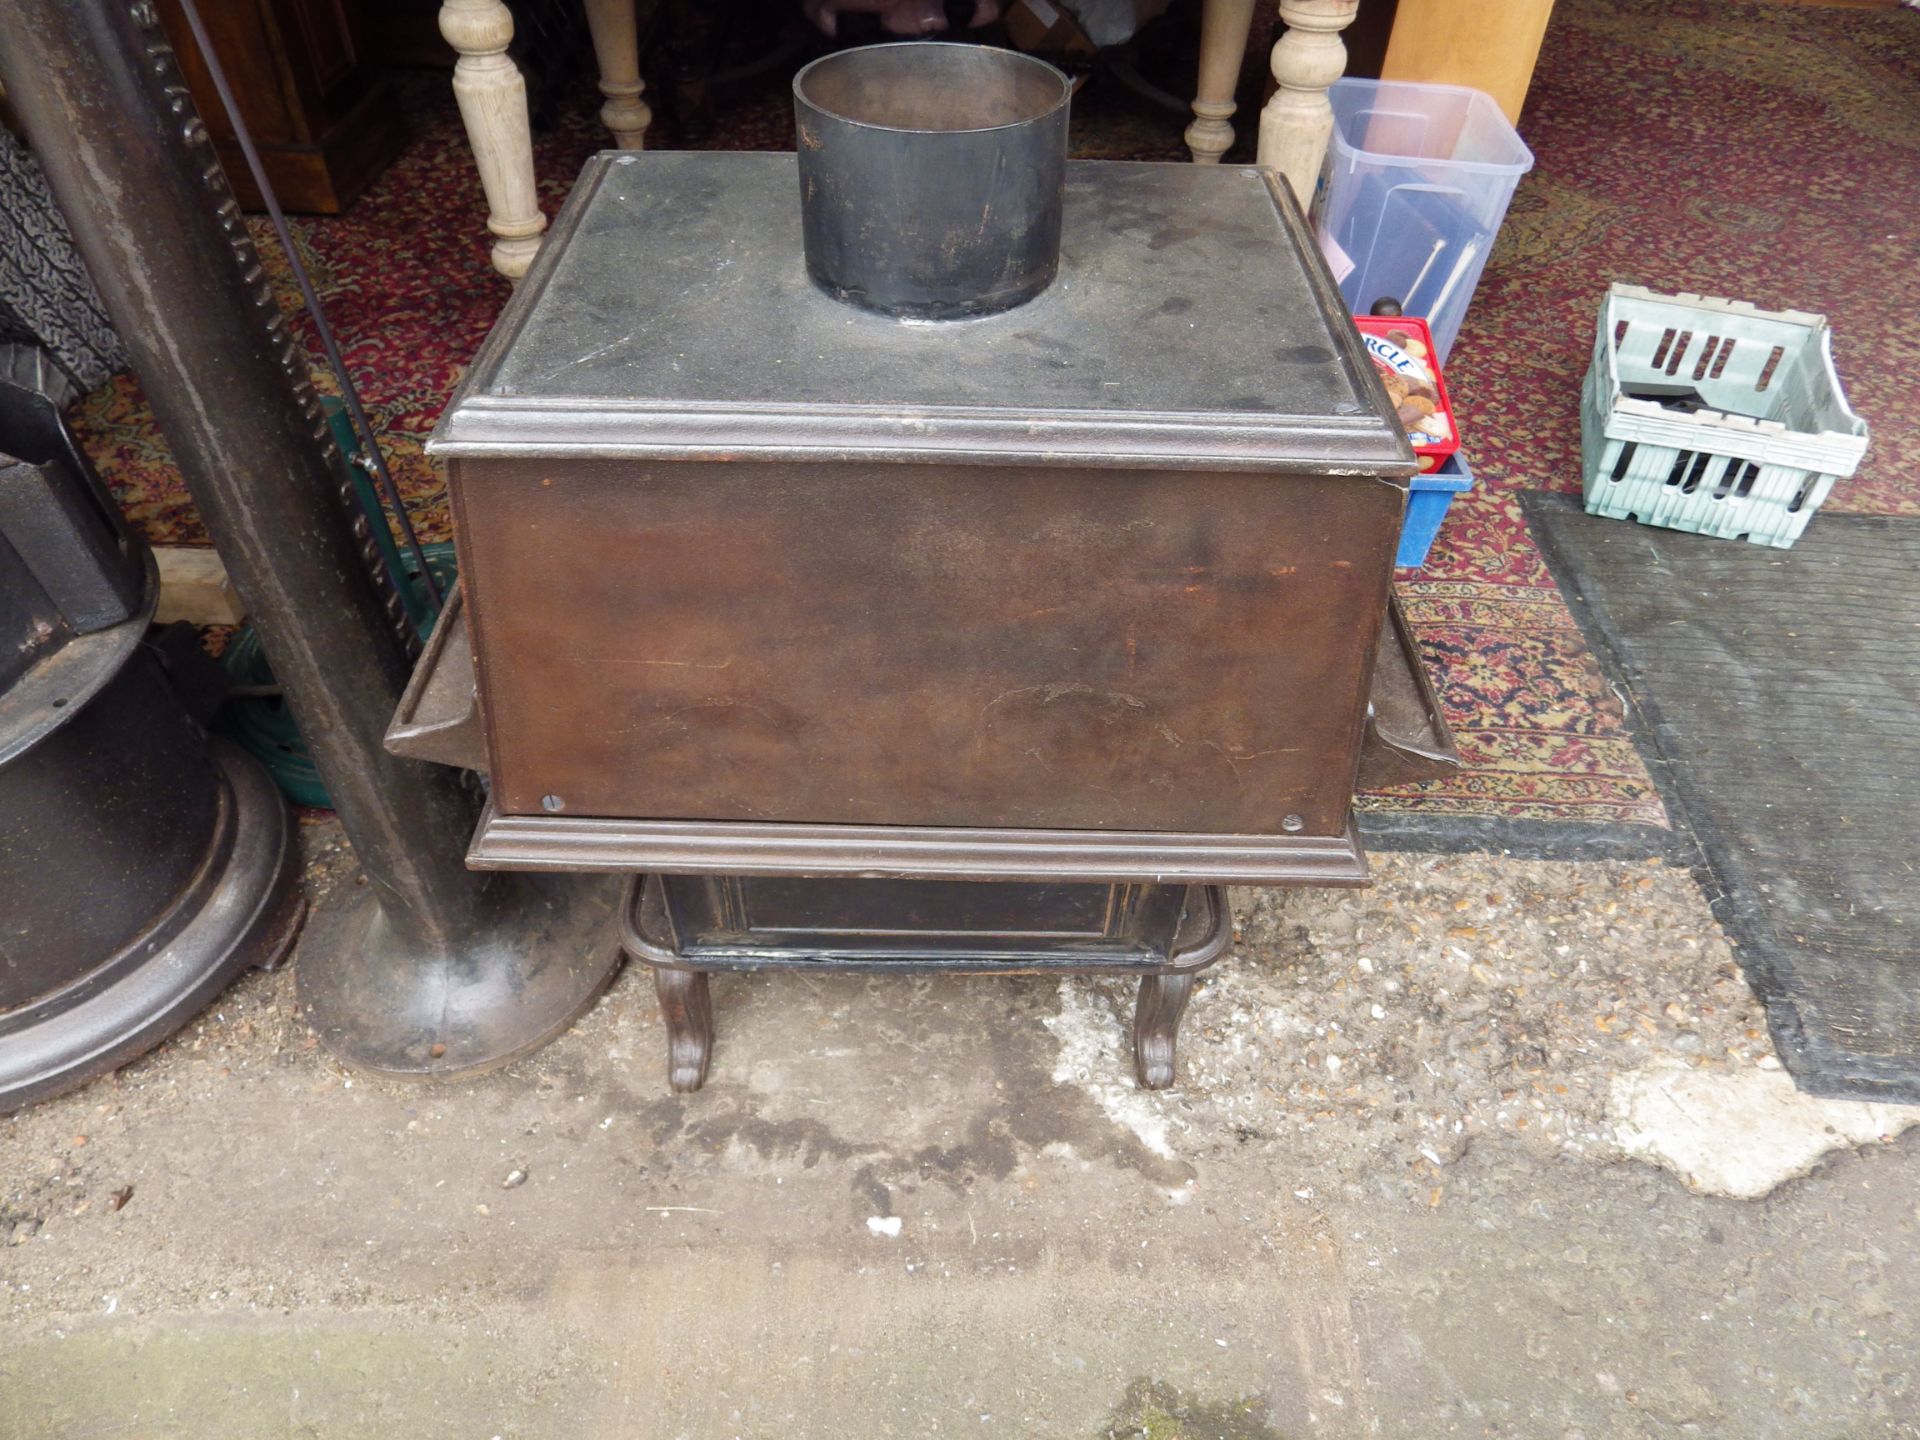 The Wee Ben tailors cast iron laundry stove with ornate door decorations incl two tailor goose irons - Image 2 of 10